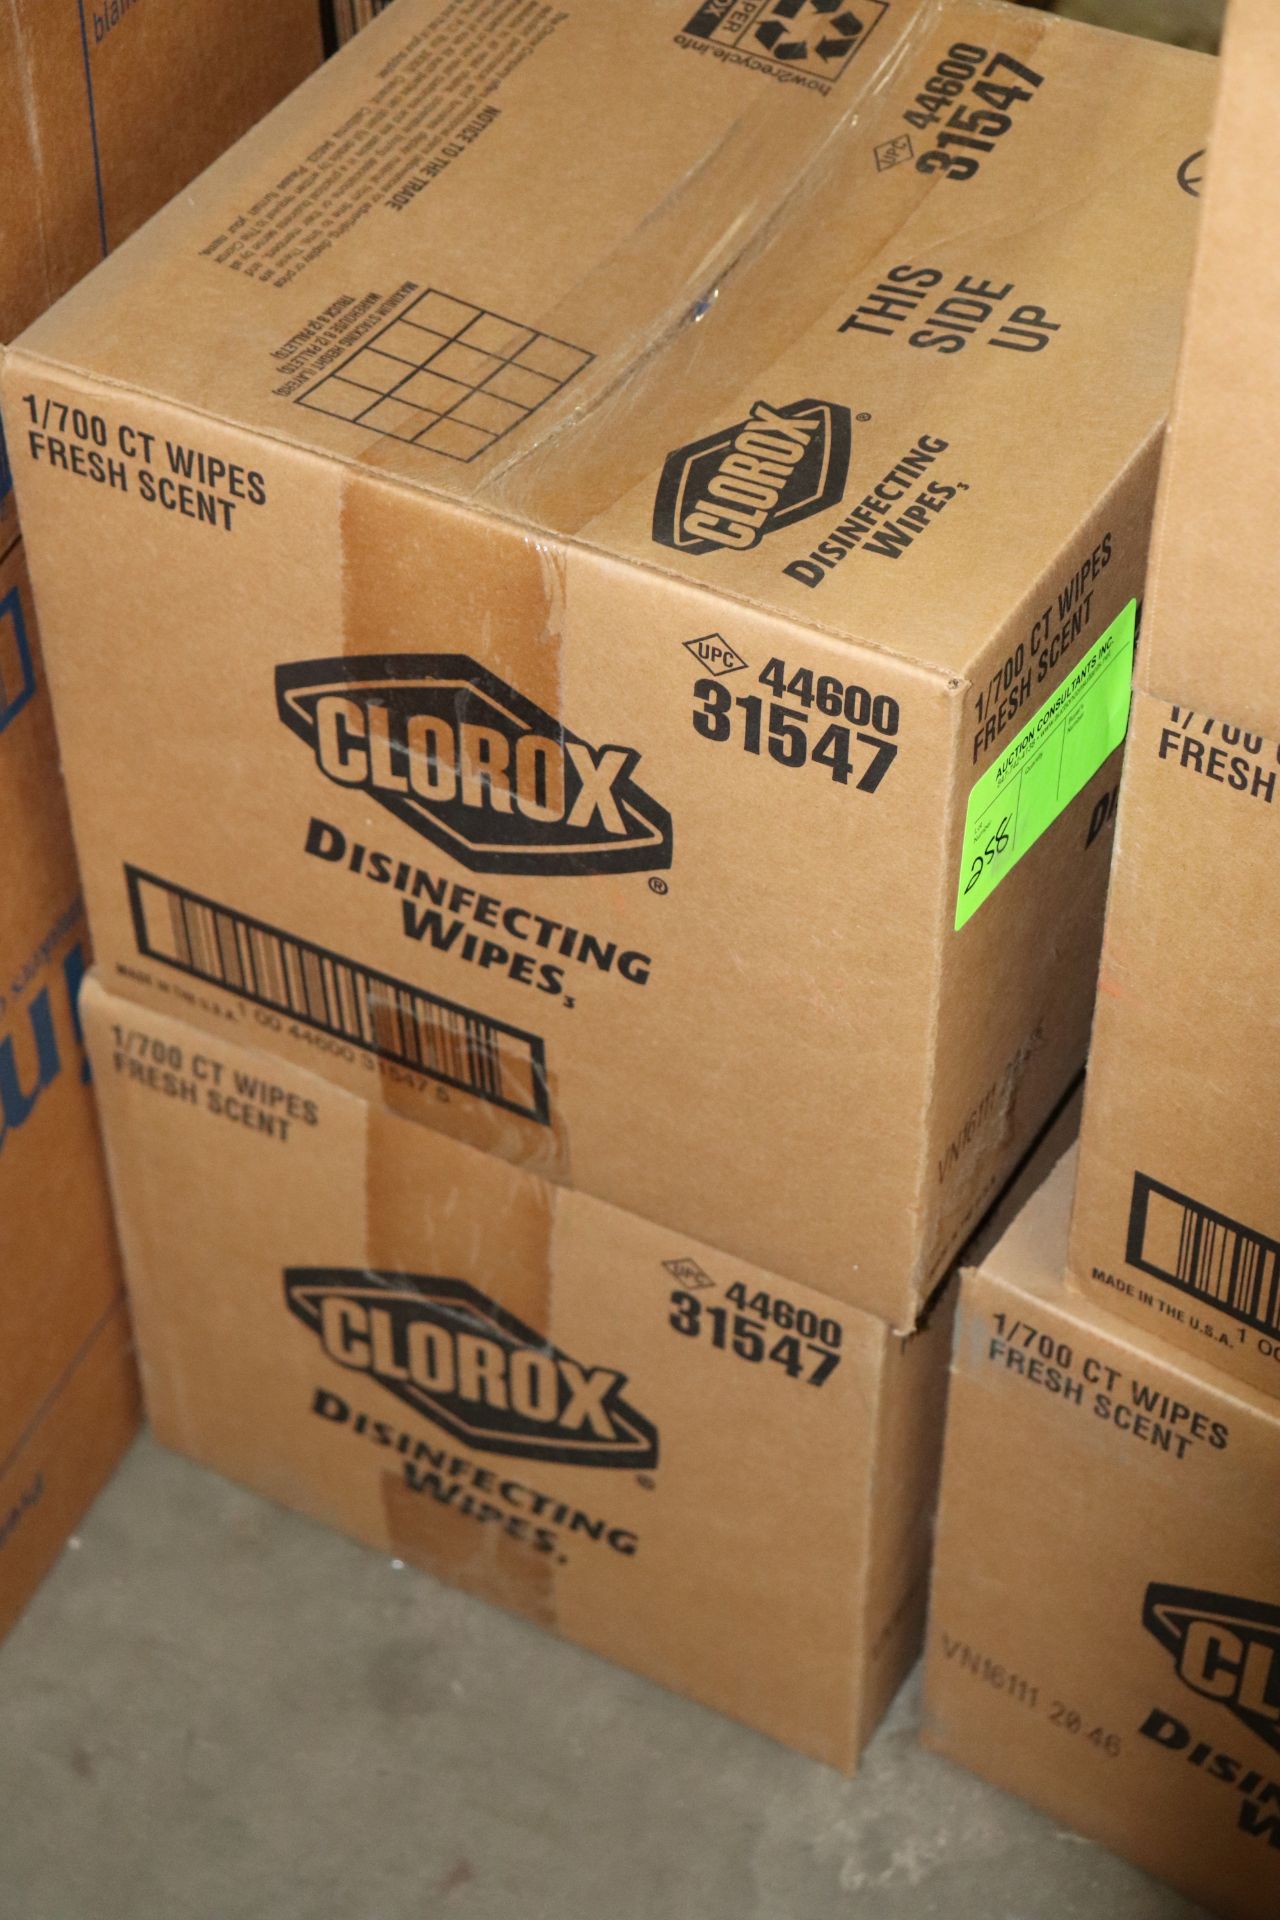 Two boxes of Clorox disinfecting wipes